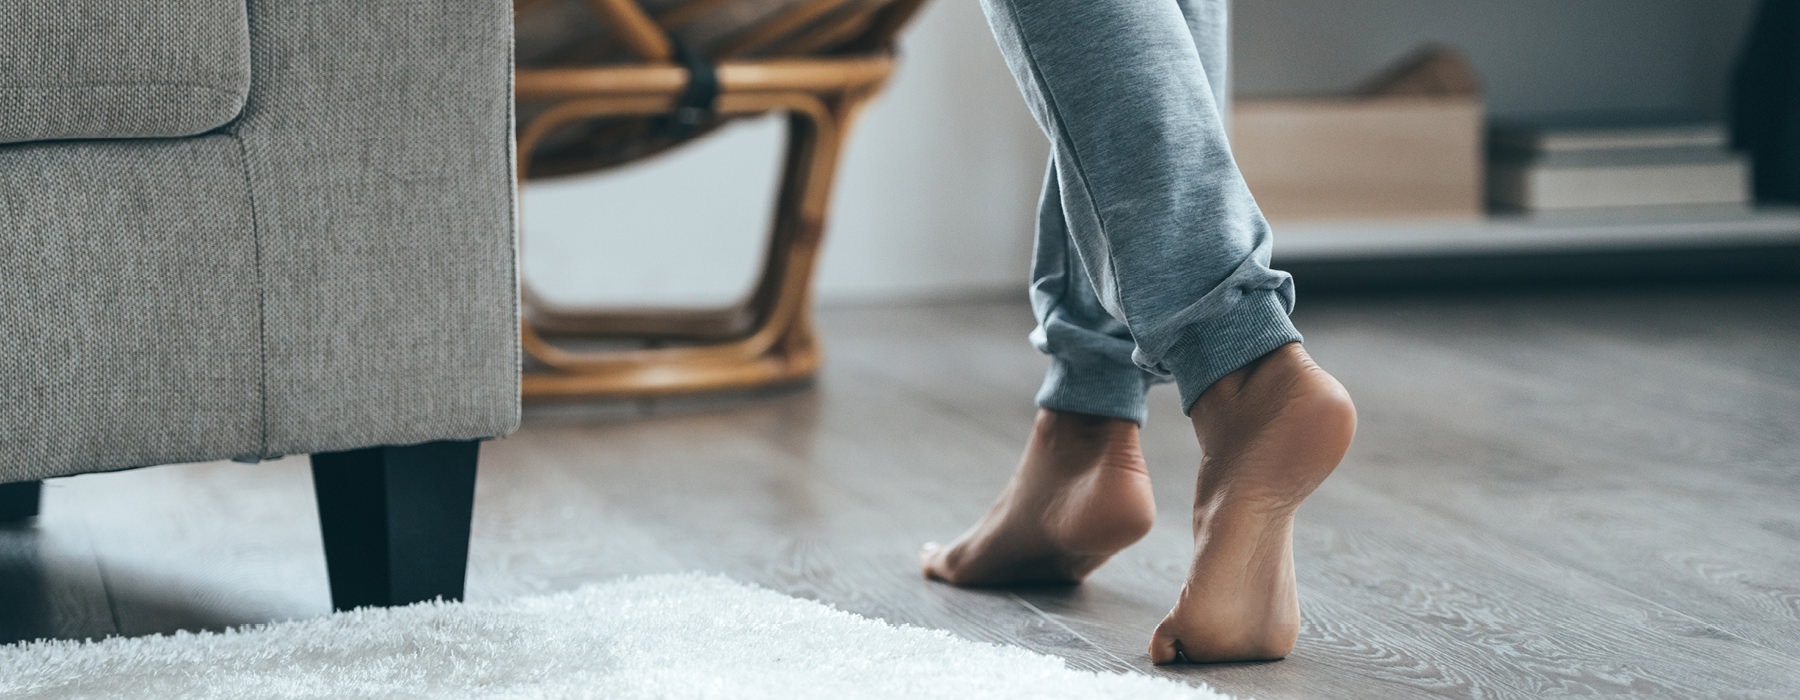 Woman walking in living room barefooted